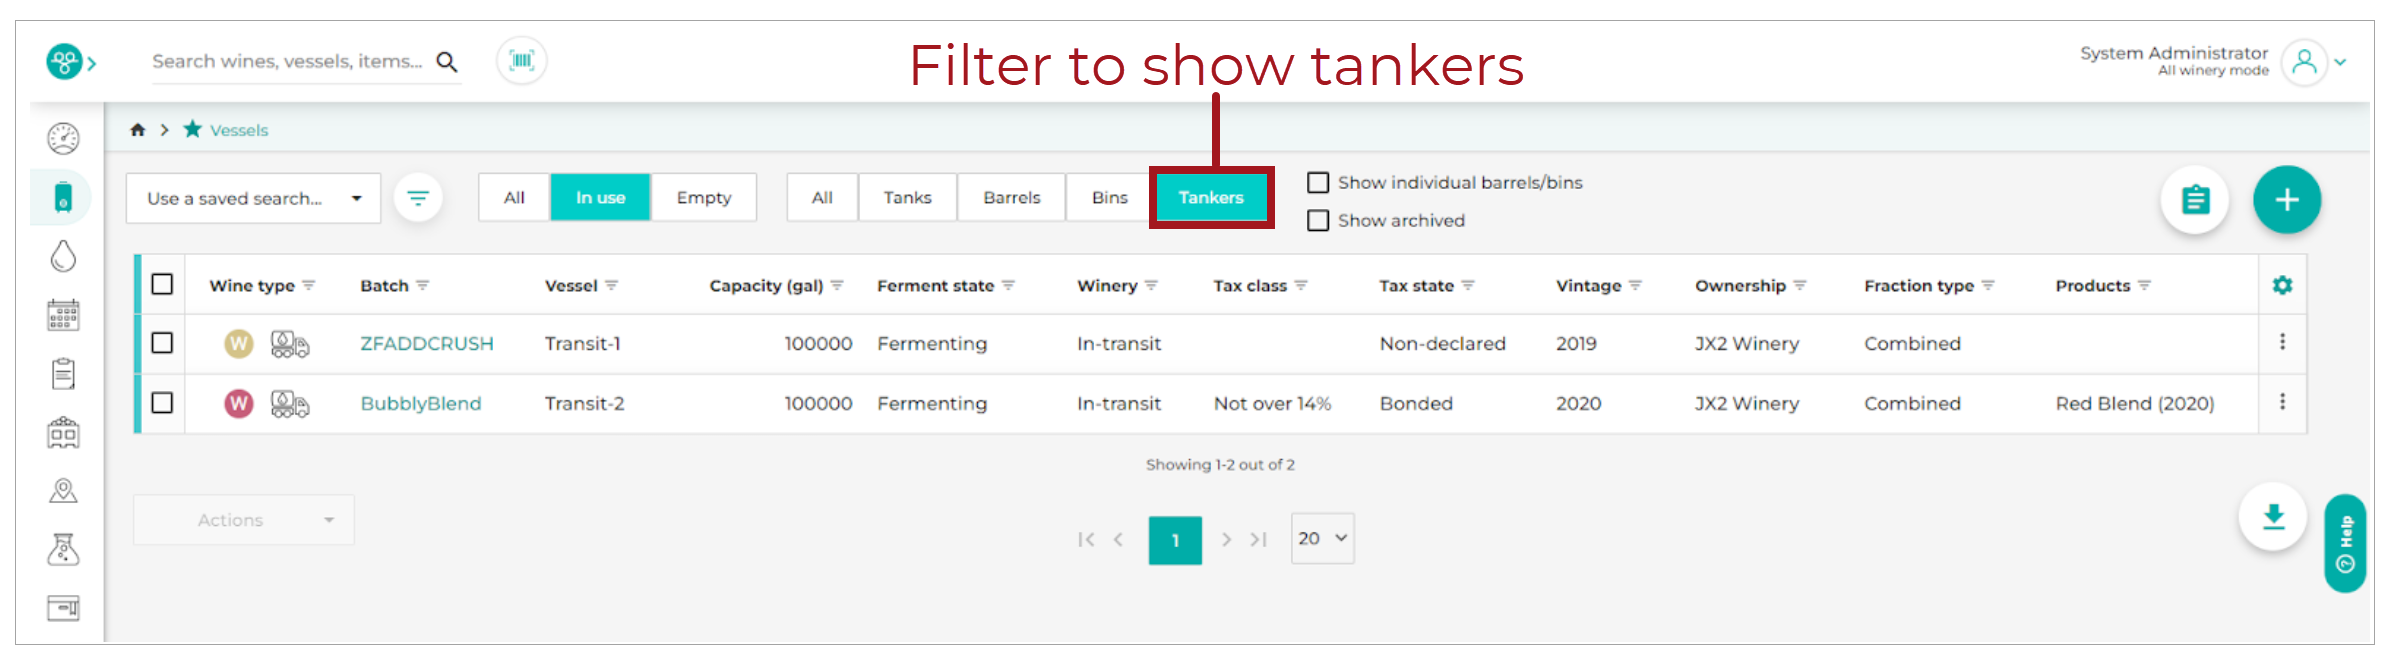 Vessels_Page_-_Tankers_Filter_20221115.png